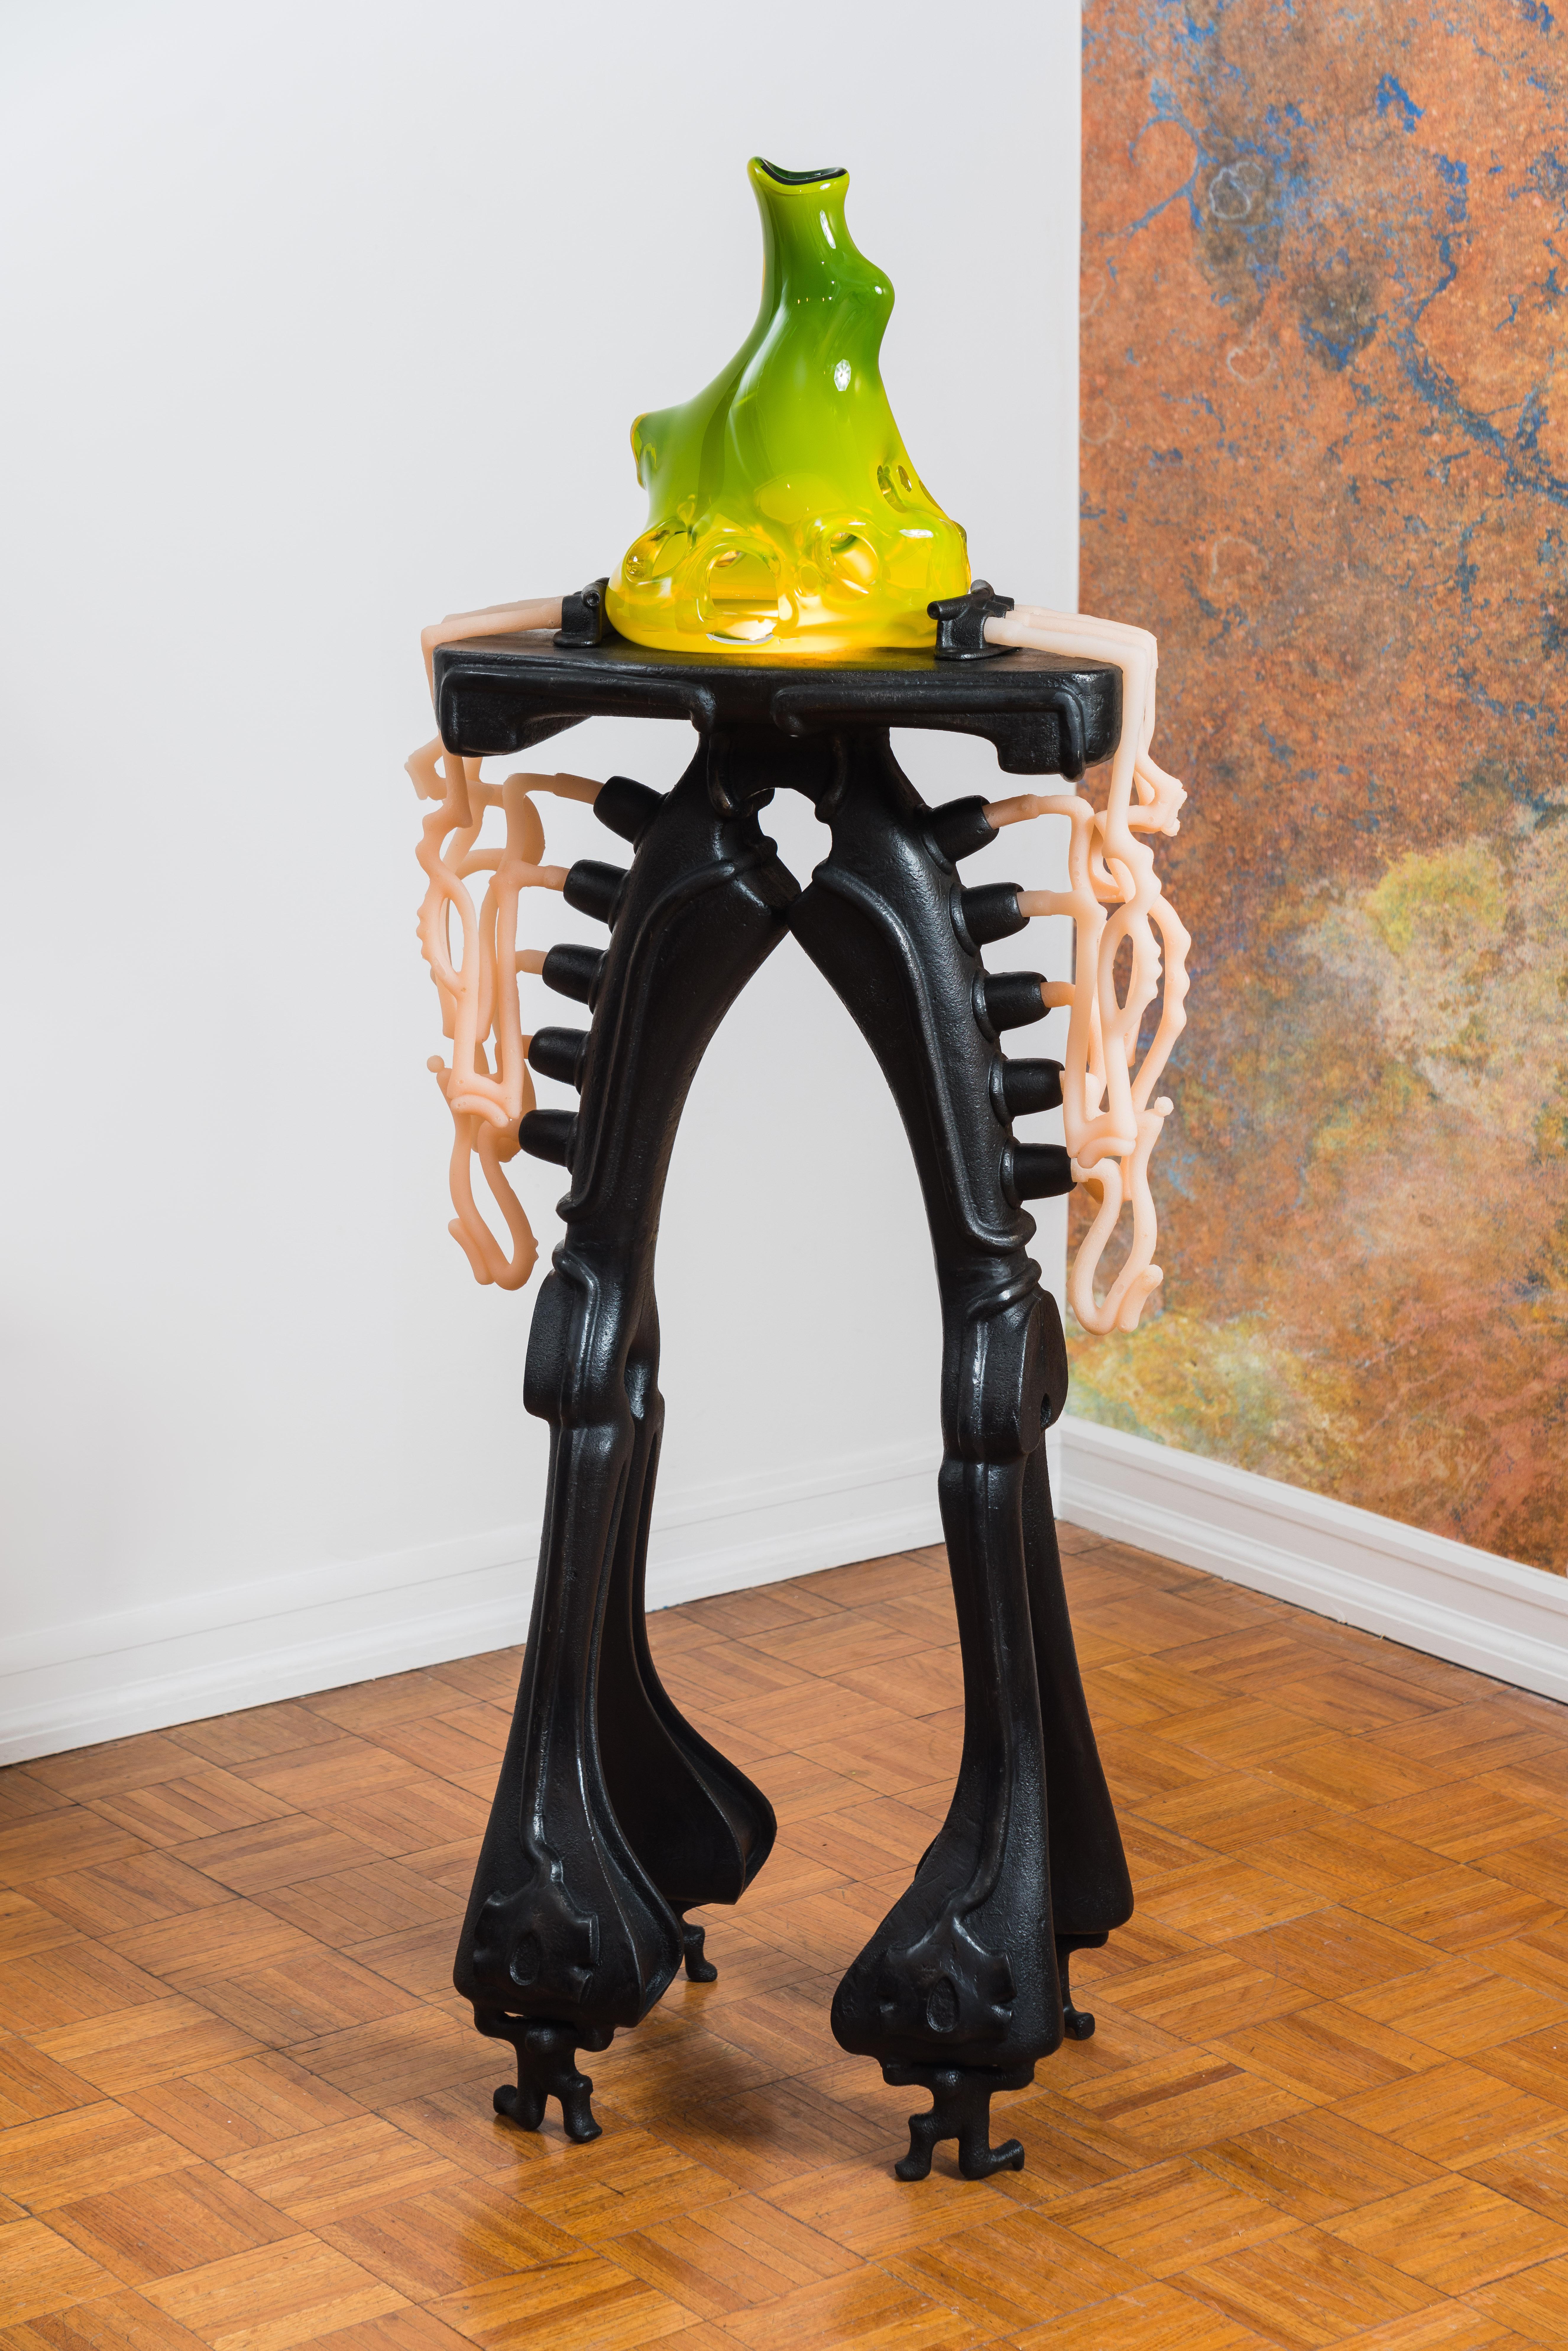 Fantastical and surrealistic floor lamp that stands on two legs, entitled 'Bionic Knees for Atlas' by American artist Ryan Decker.

This preternatural piece comes from a virtual world of Ryan Decker's imagination. As both a sculpture and a standing